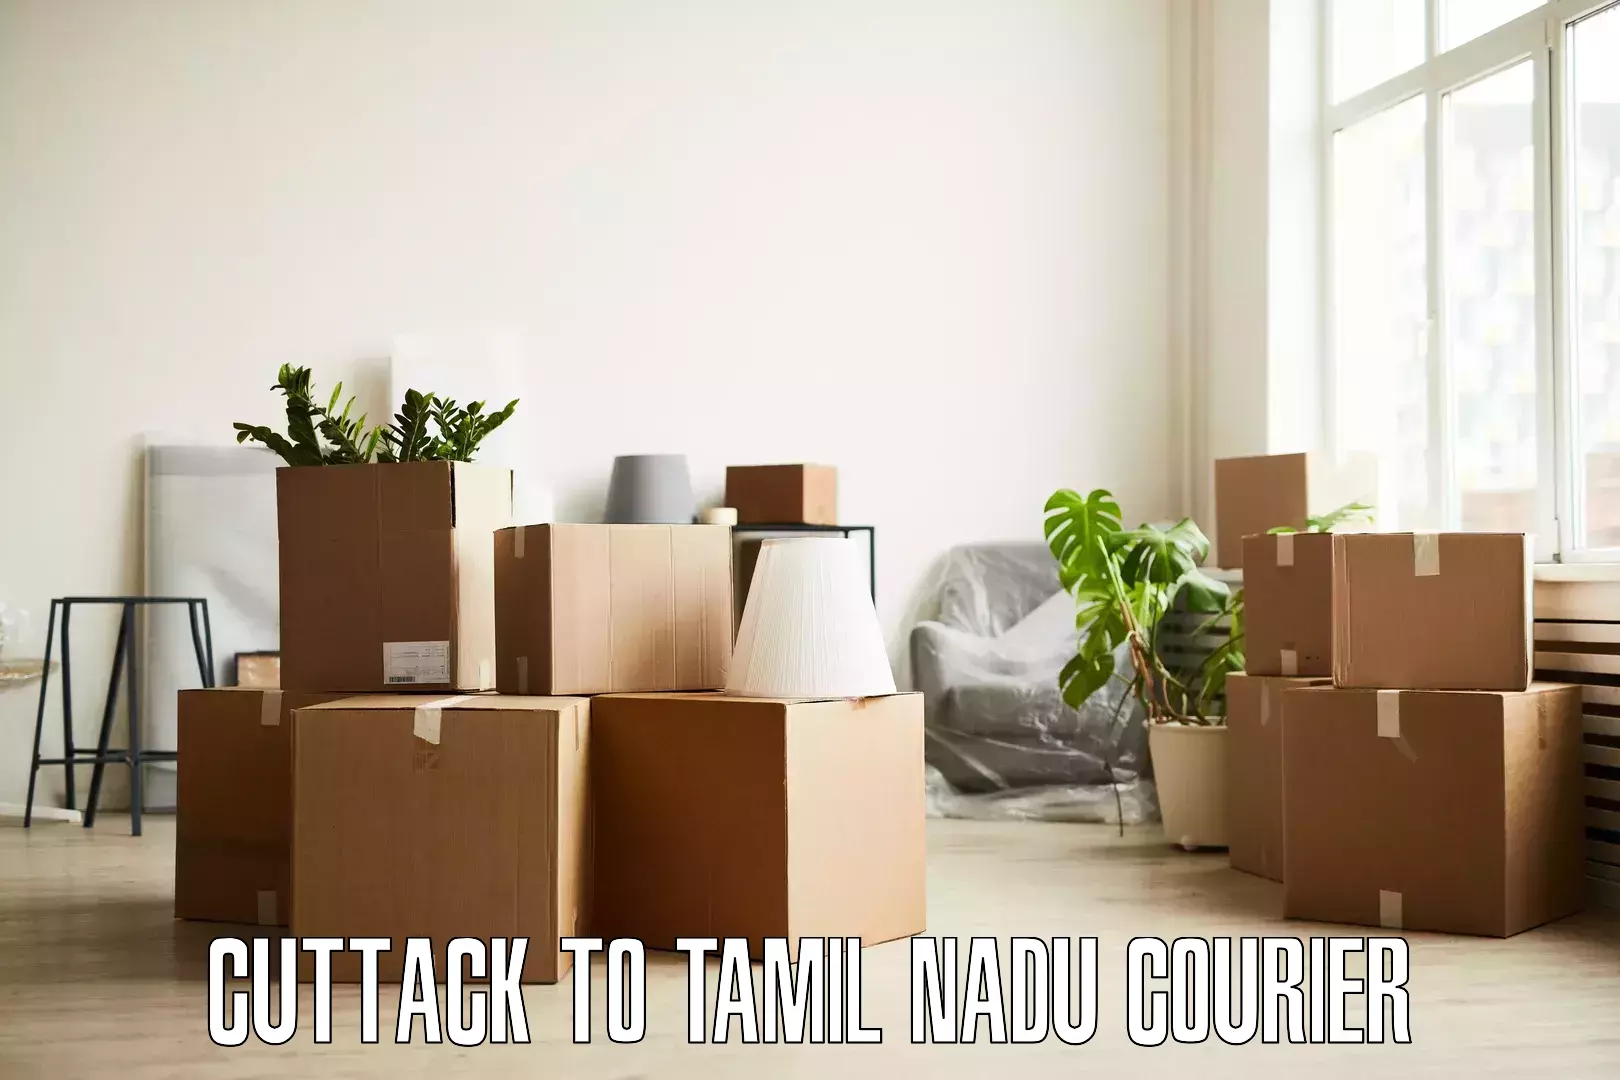 Affordable moving services Cuttack to Rathinasabapathy Puram